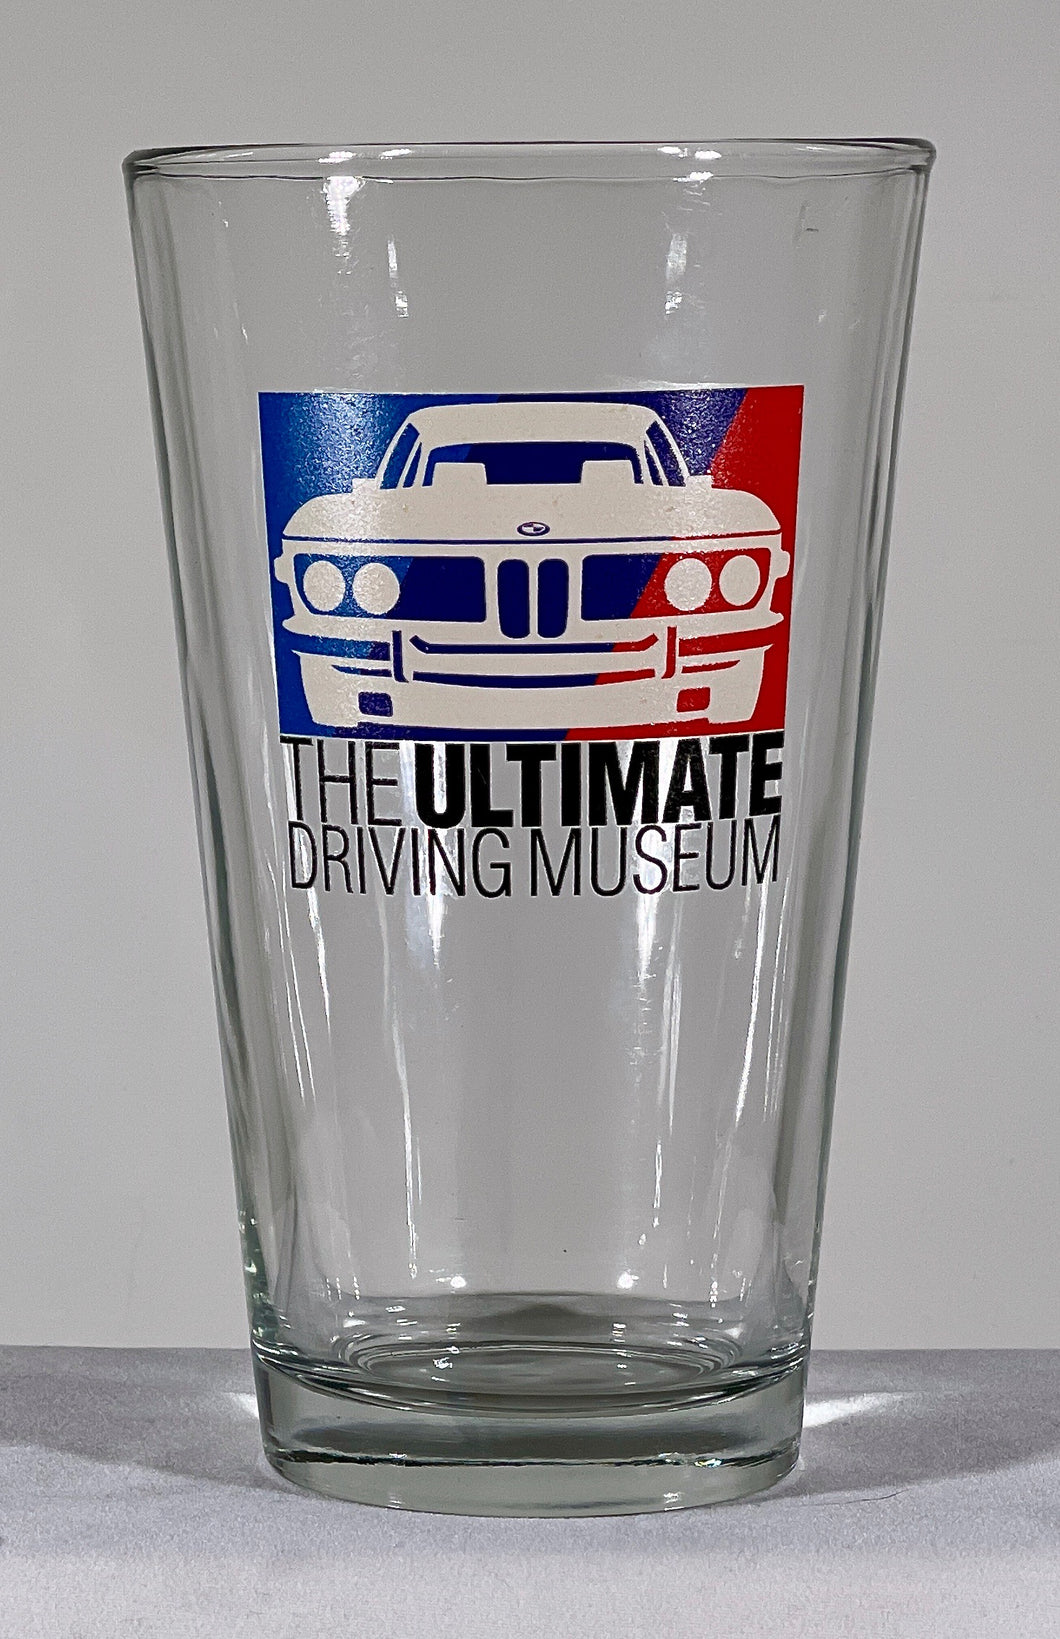 The Ultimate Driving Museum Pint Glass